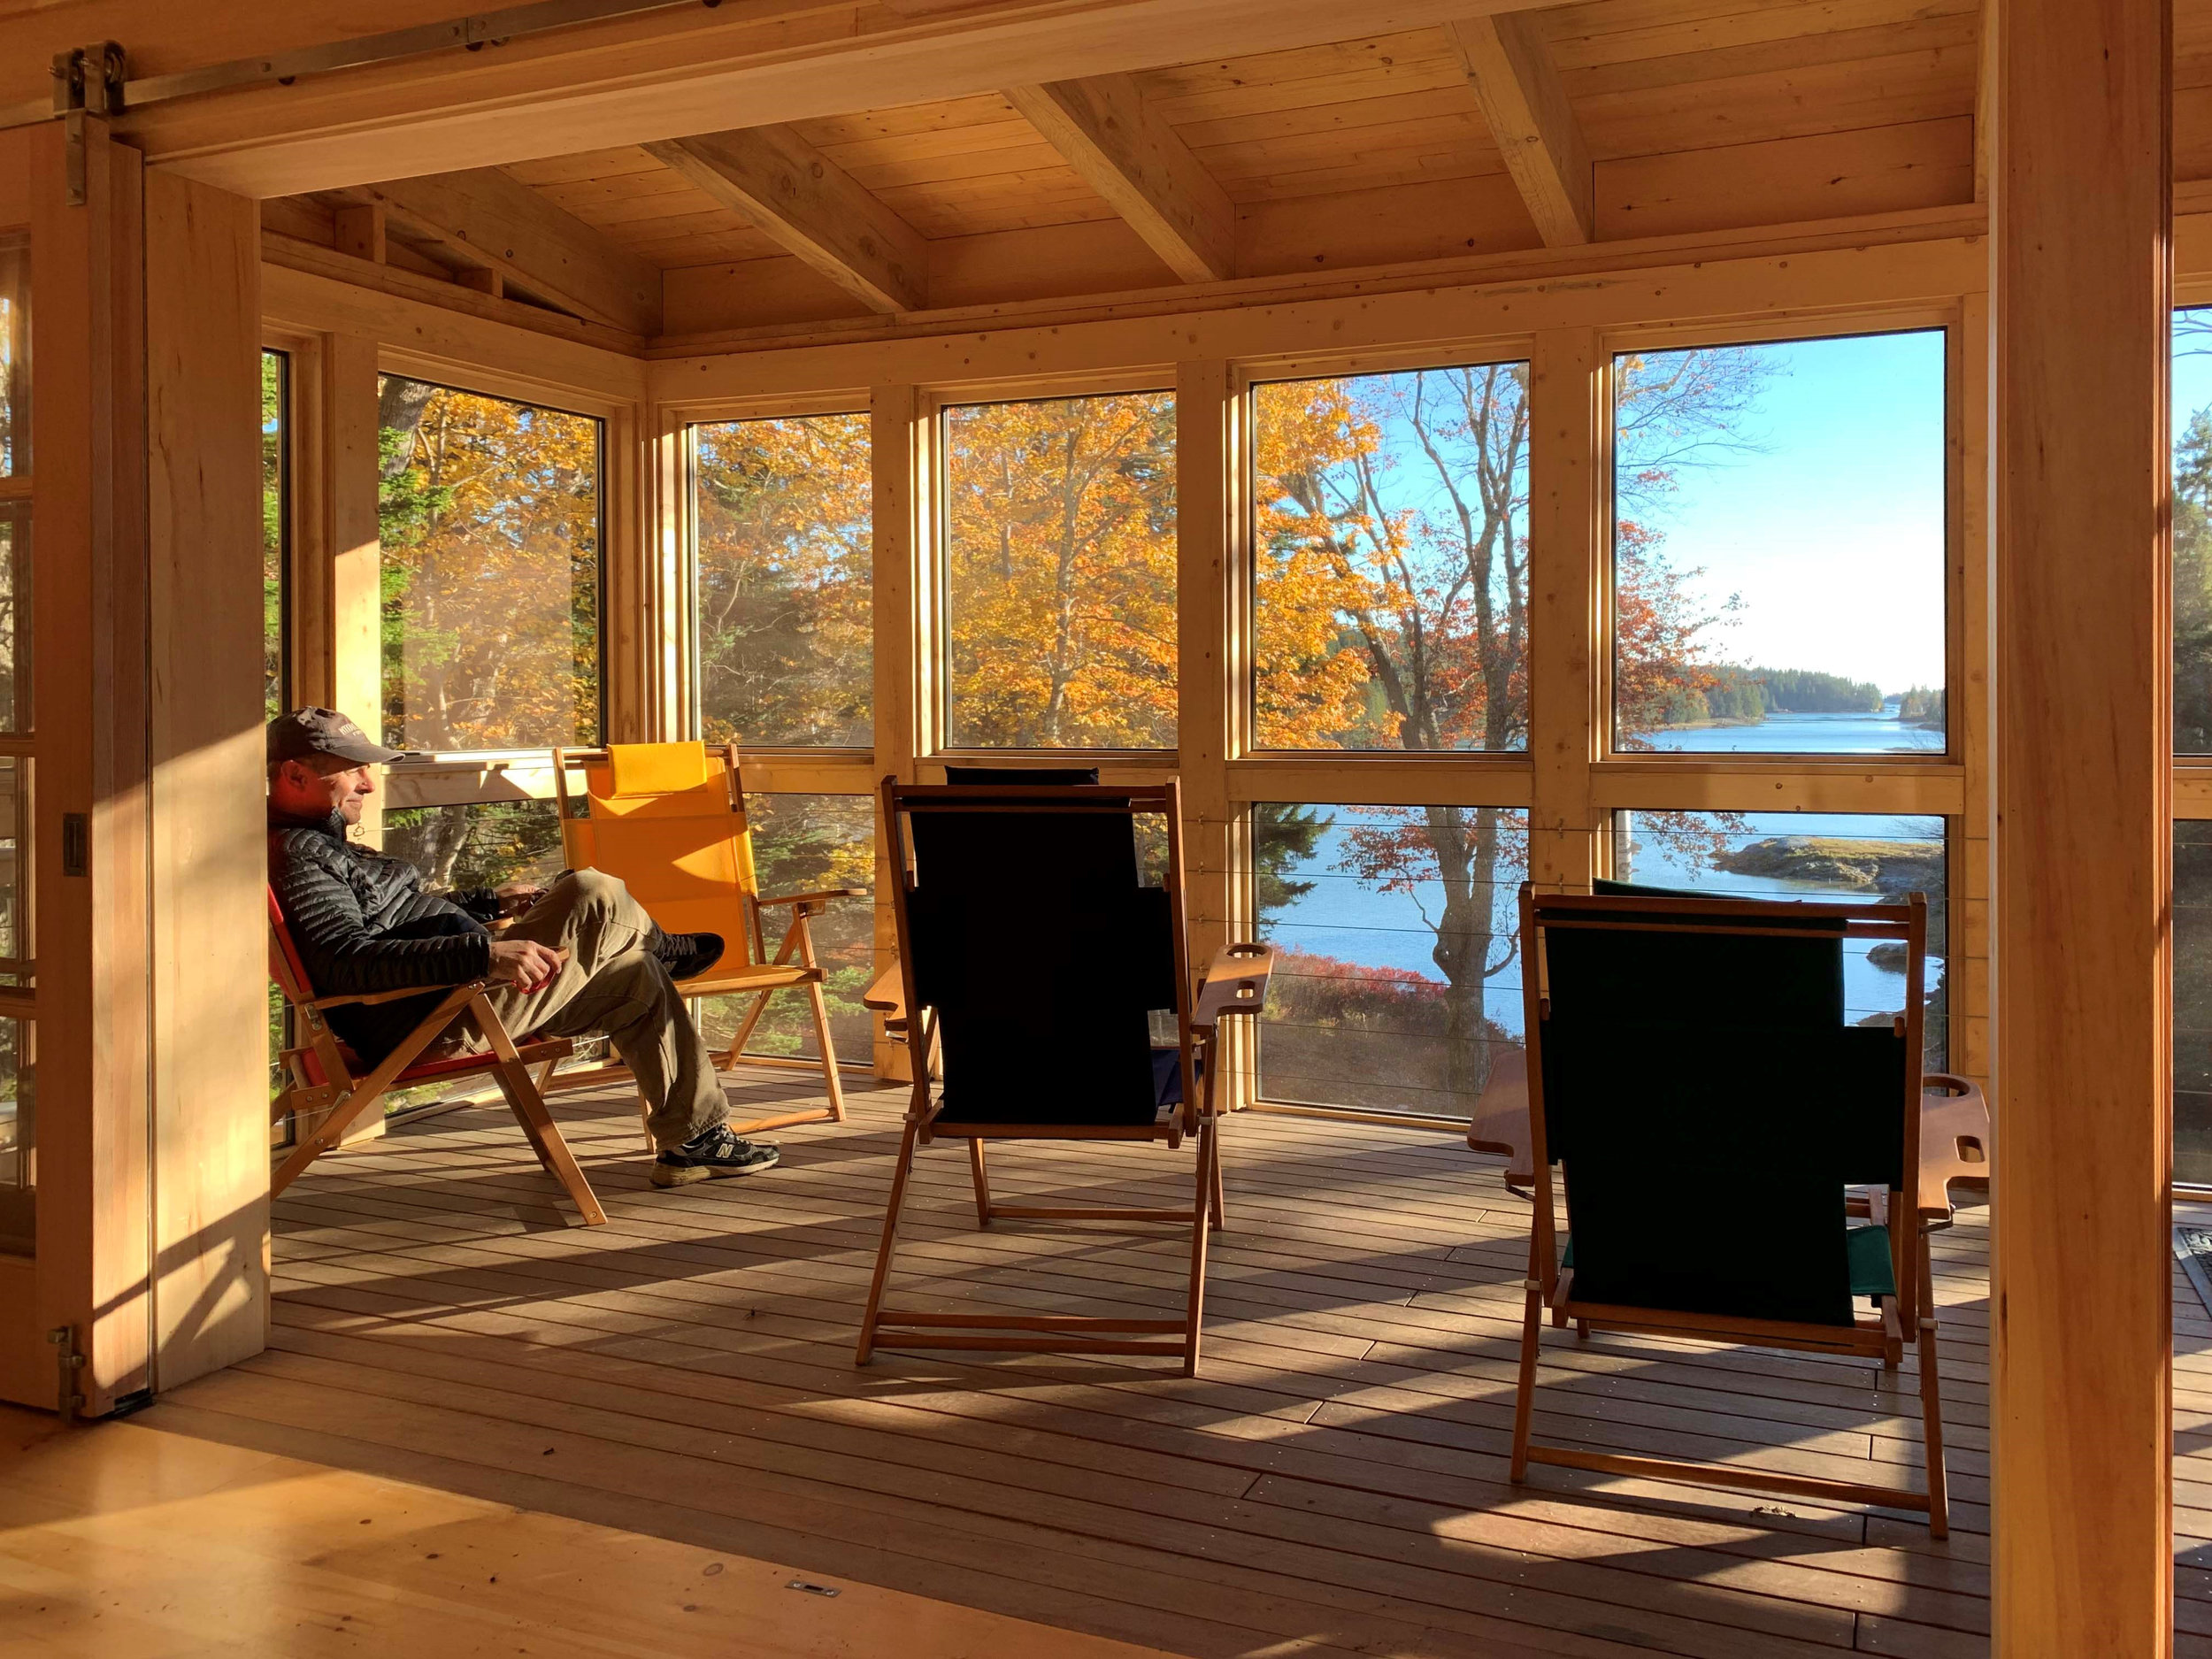 pho-int-cove_camp_porch_DWA_view-150ppi-27x20.jpg